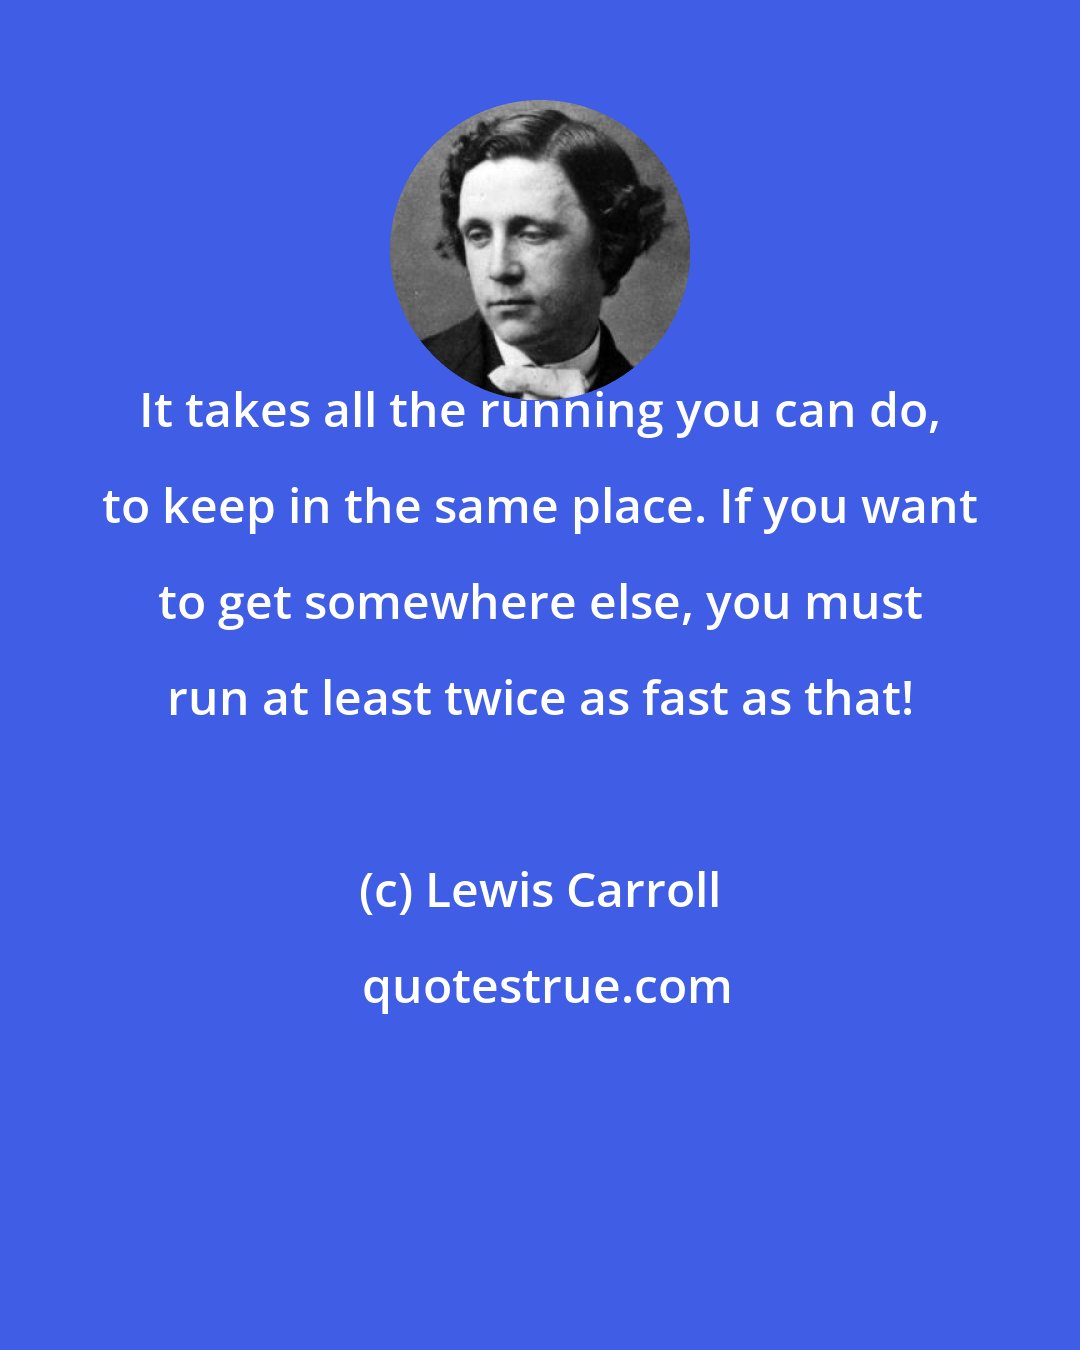 Lewis Carroll: It takes all the running you can do, to keep in the same place. If you want to get somewhere else, you must run at least twice as fast as that!